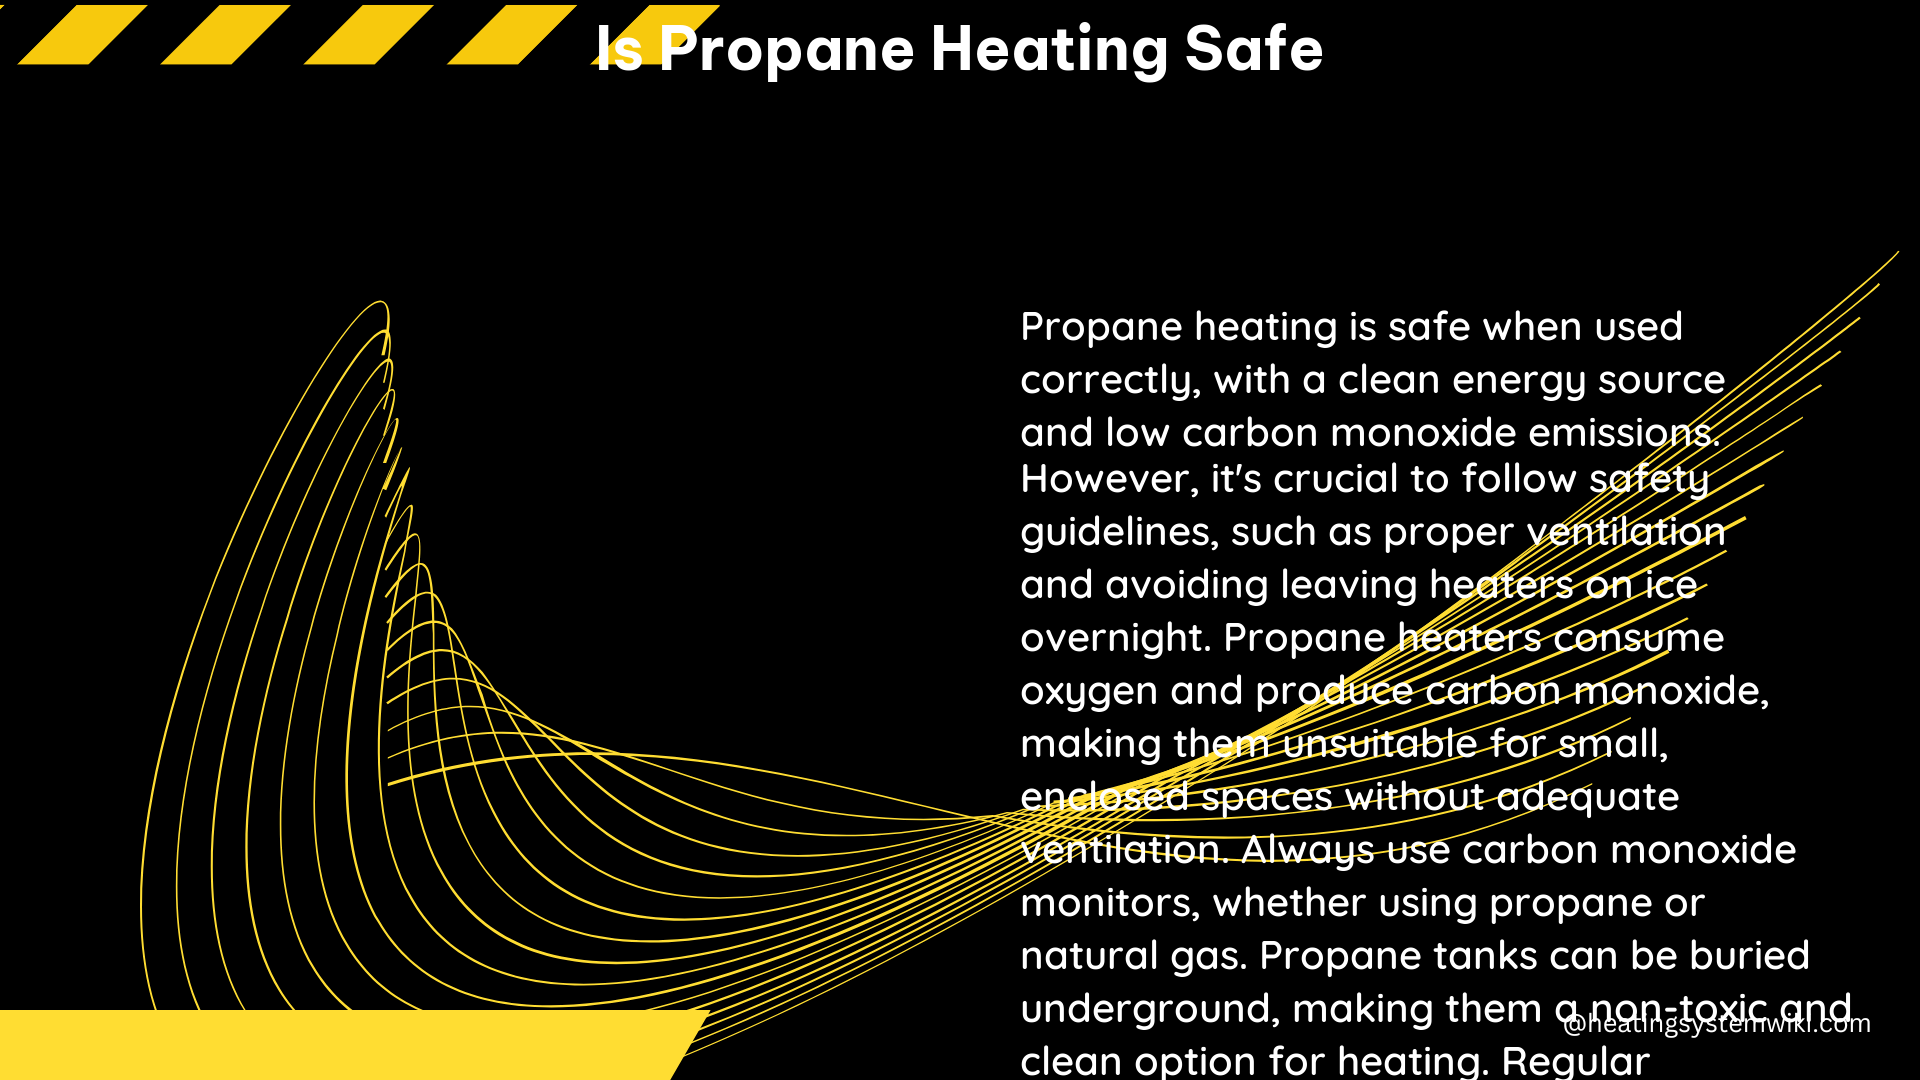 is propane heating safe